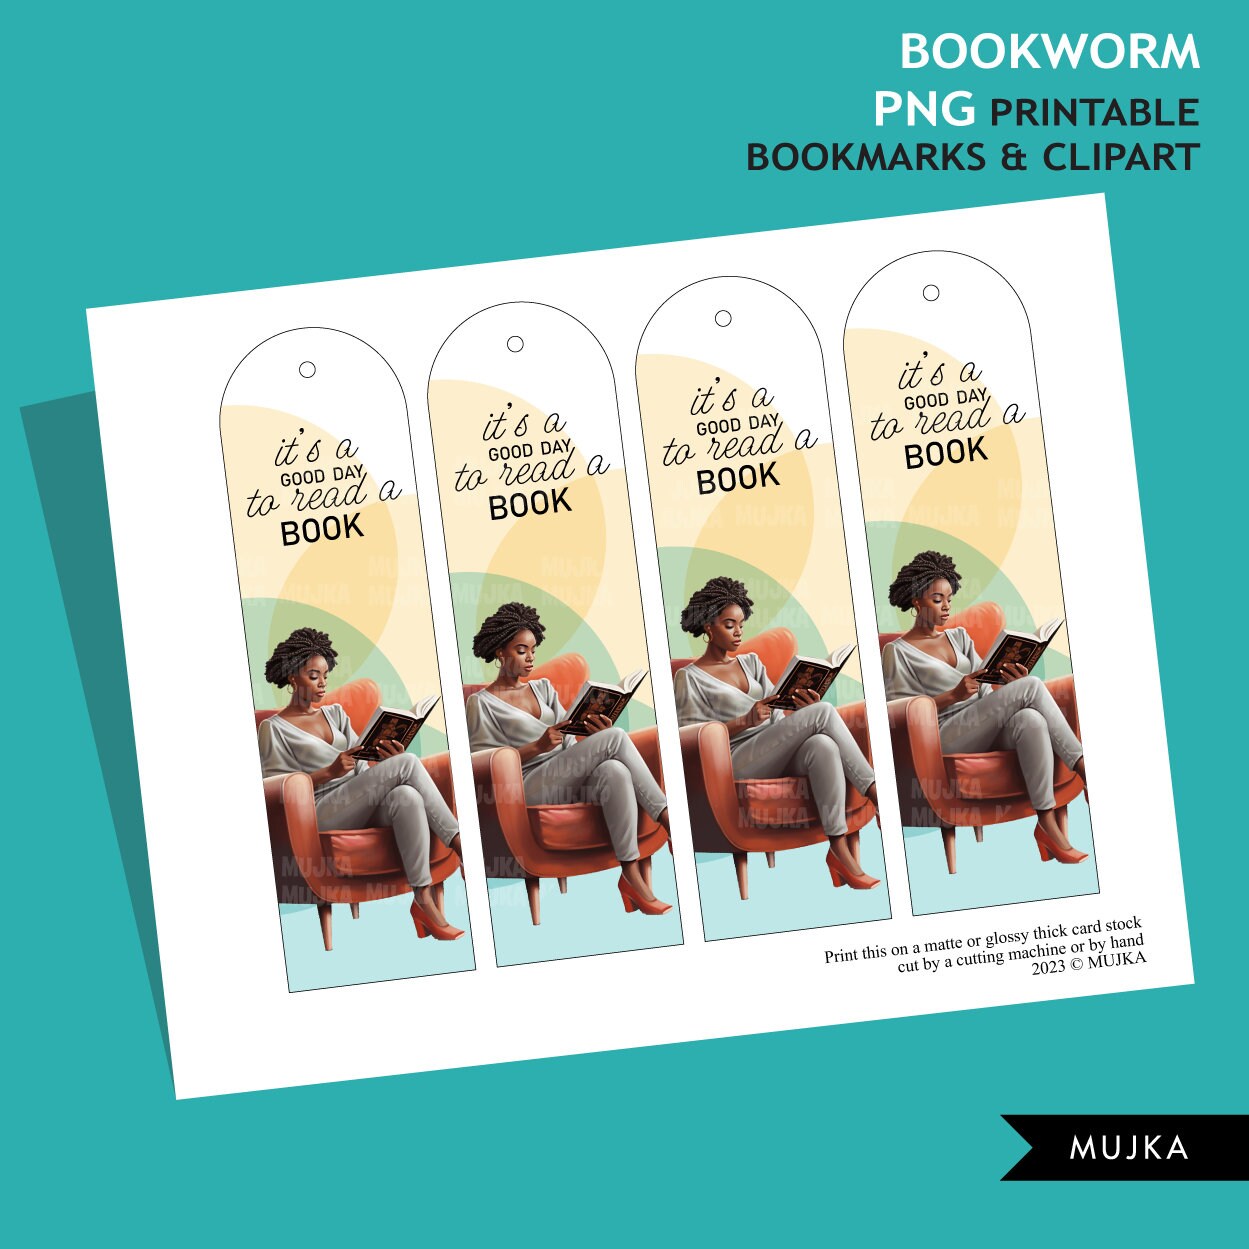 Bookworm png, Printable Bookmarks, Black woman reading png, Bookworm clipart, reading clipart, melanin woman png, brown girl stickers